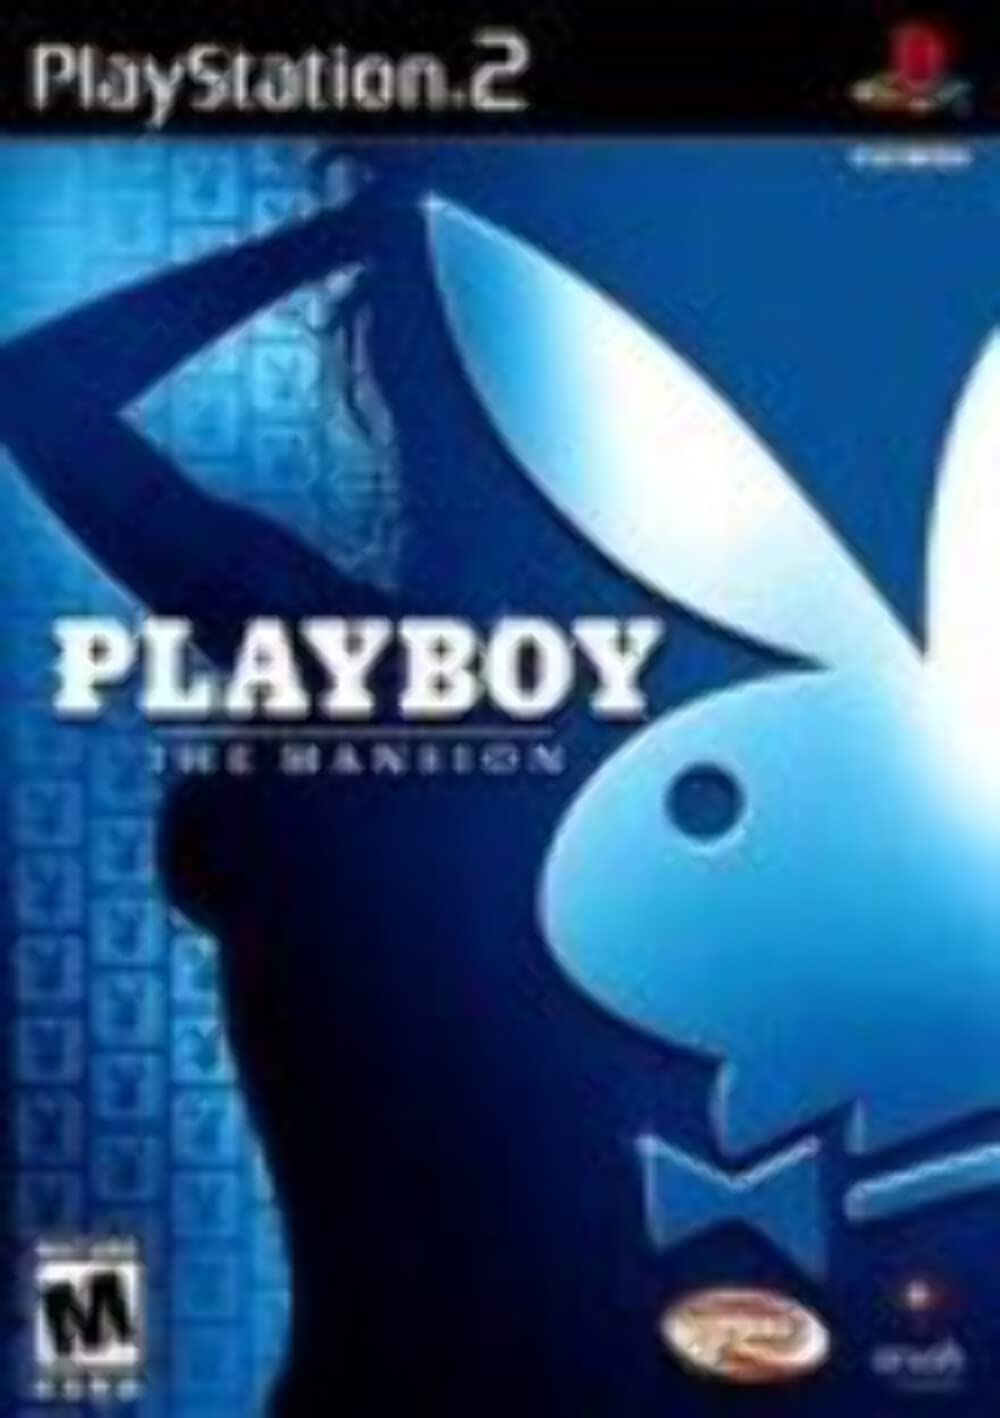 debbie greenslade recommends Playboys The Mansion Gameplay